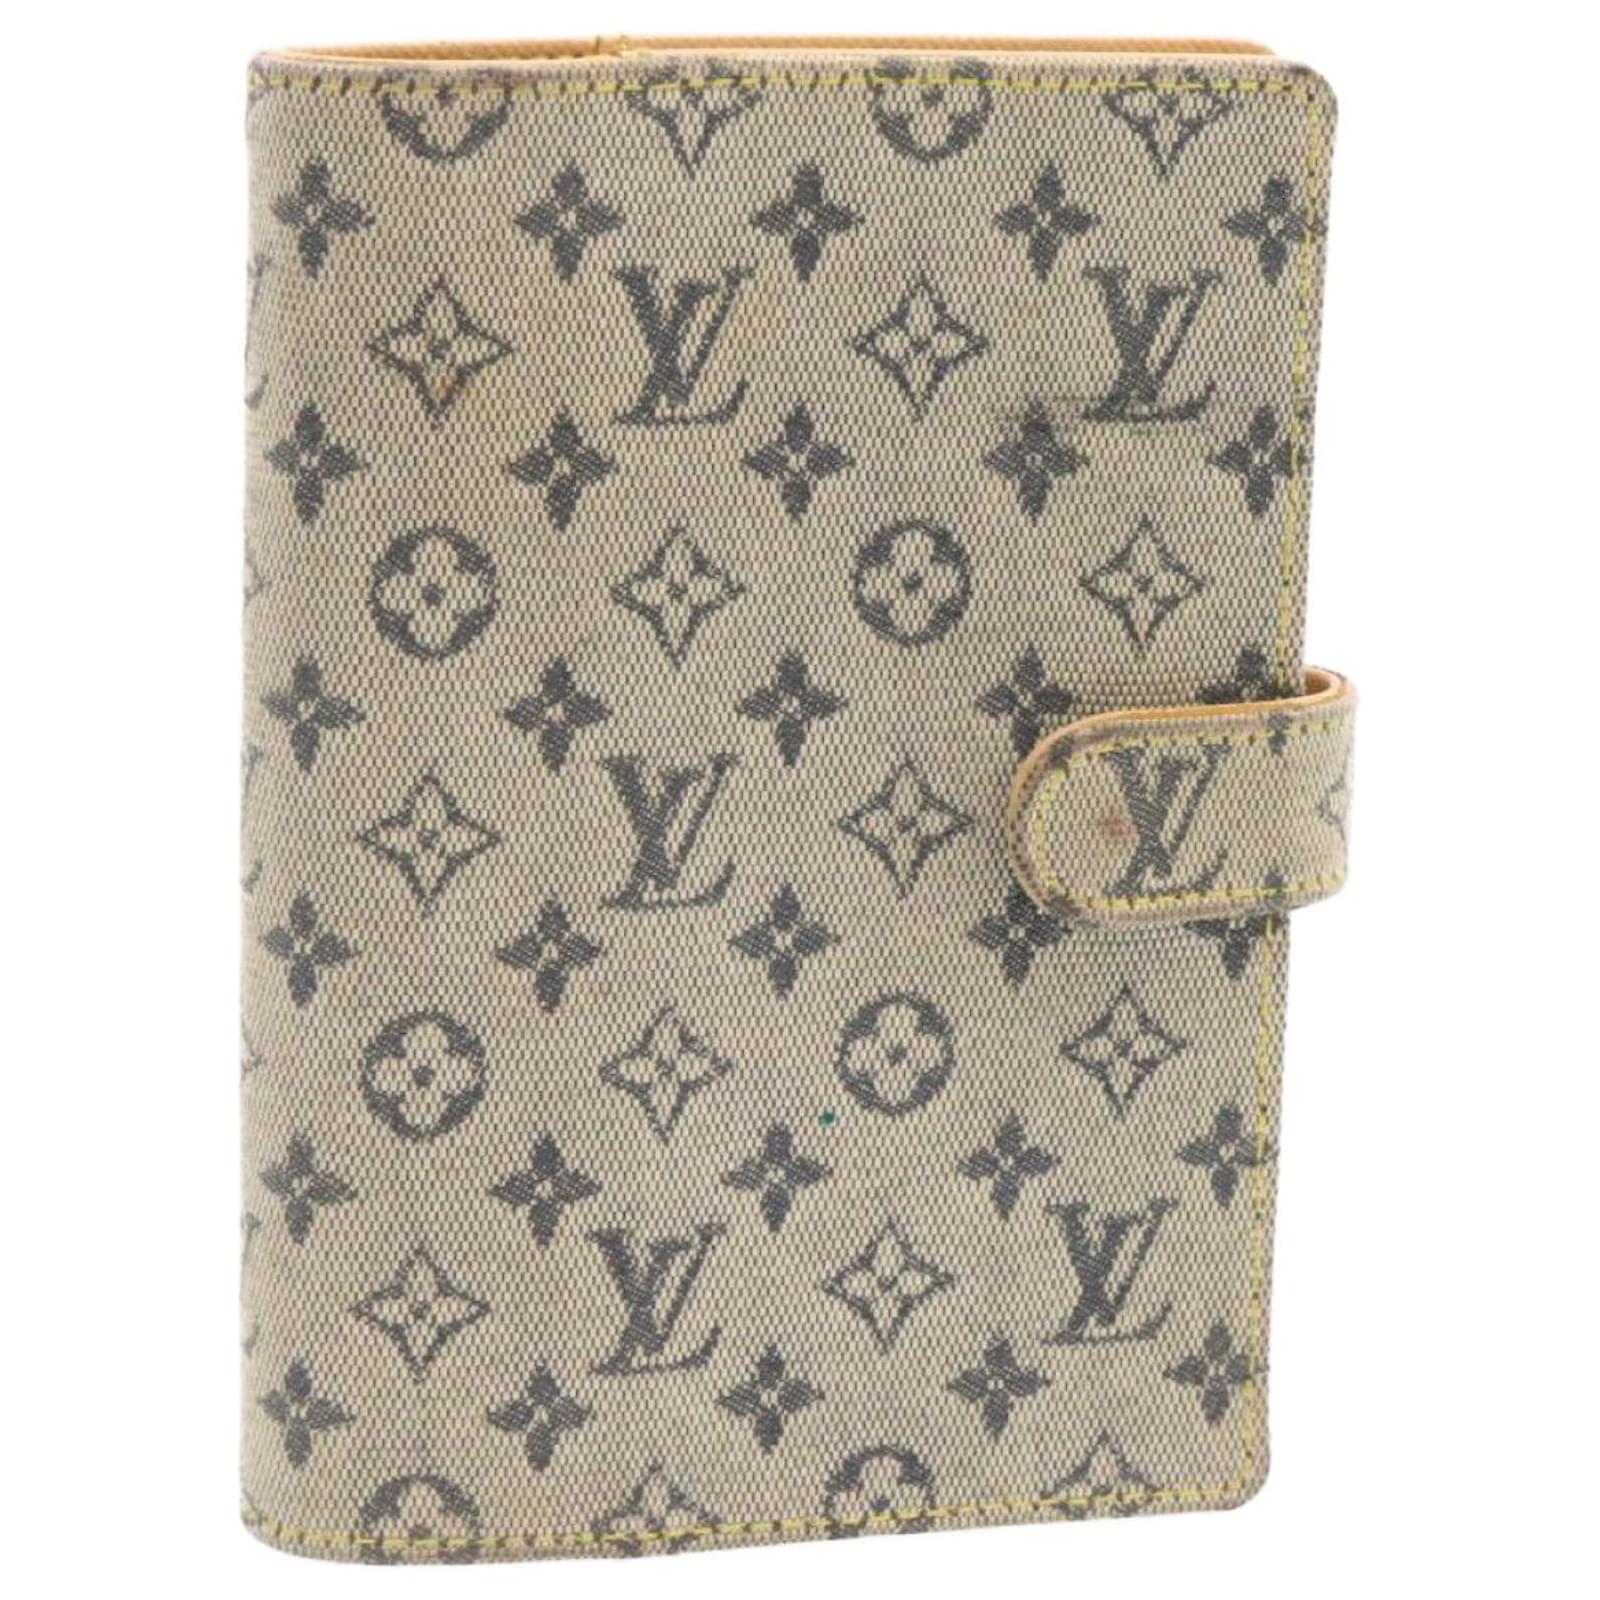 Louis Vuitton Monogram Agenda Address Book and Planner with Card